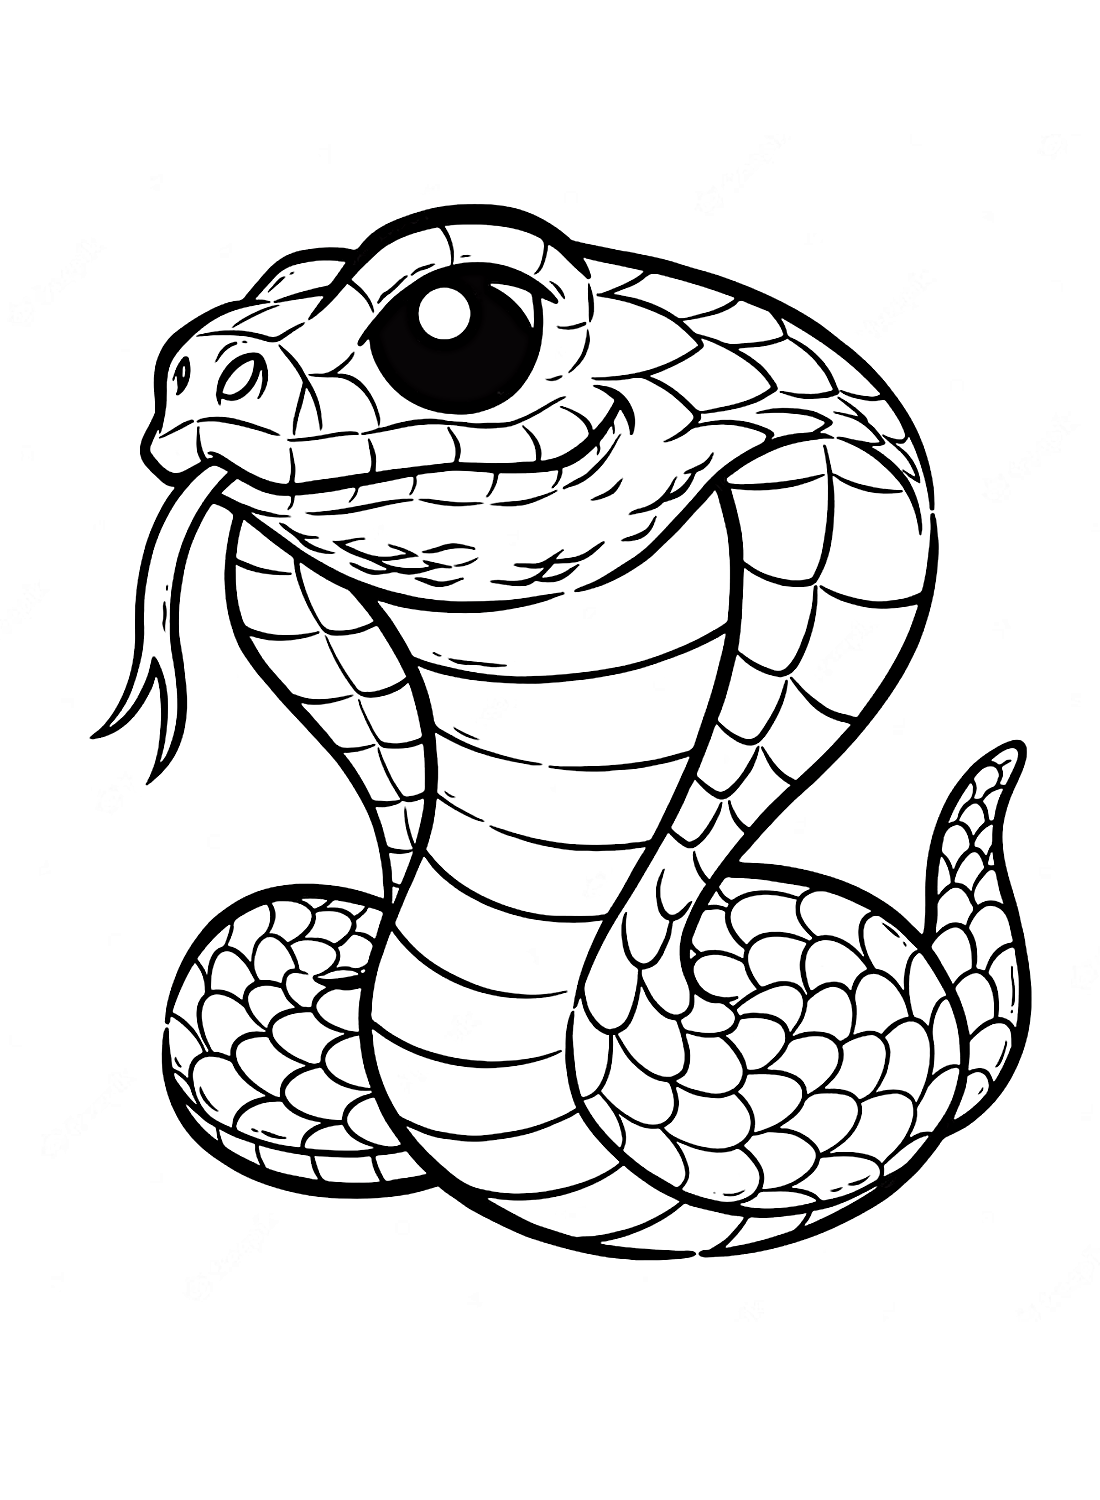 Very easy cobra coloring page